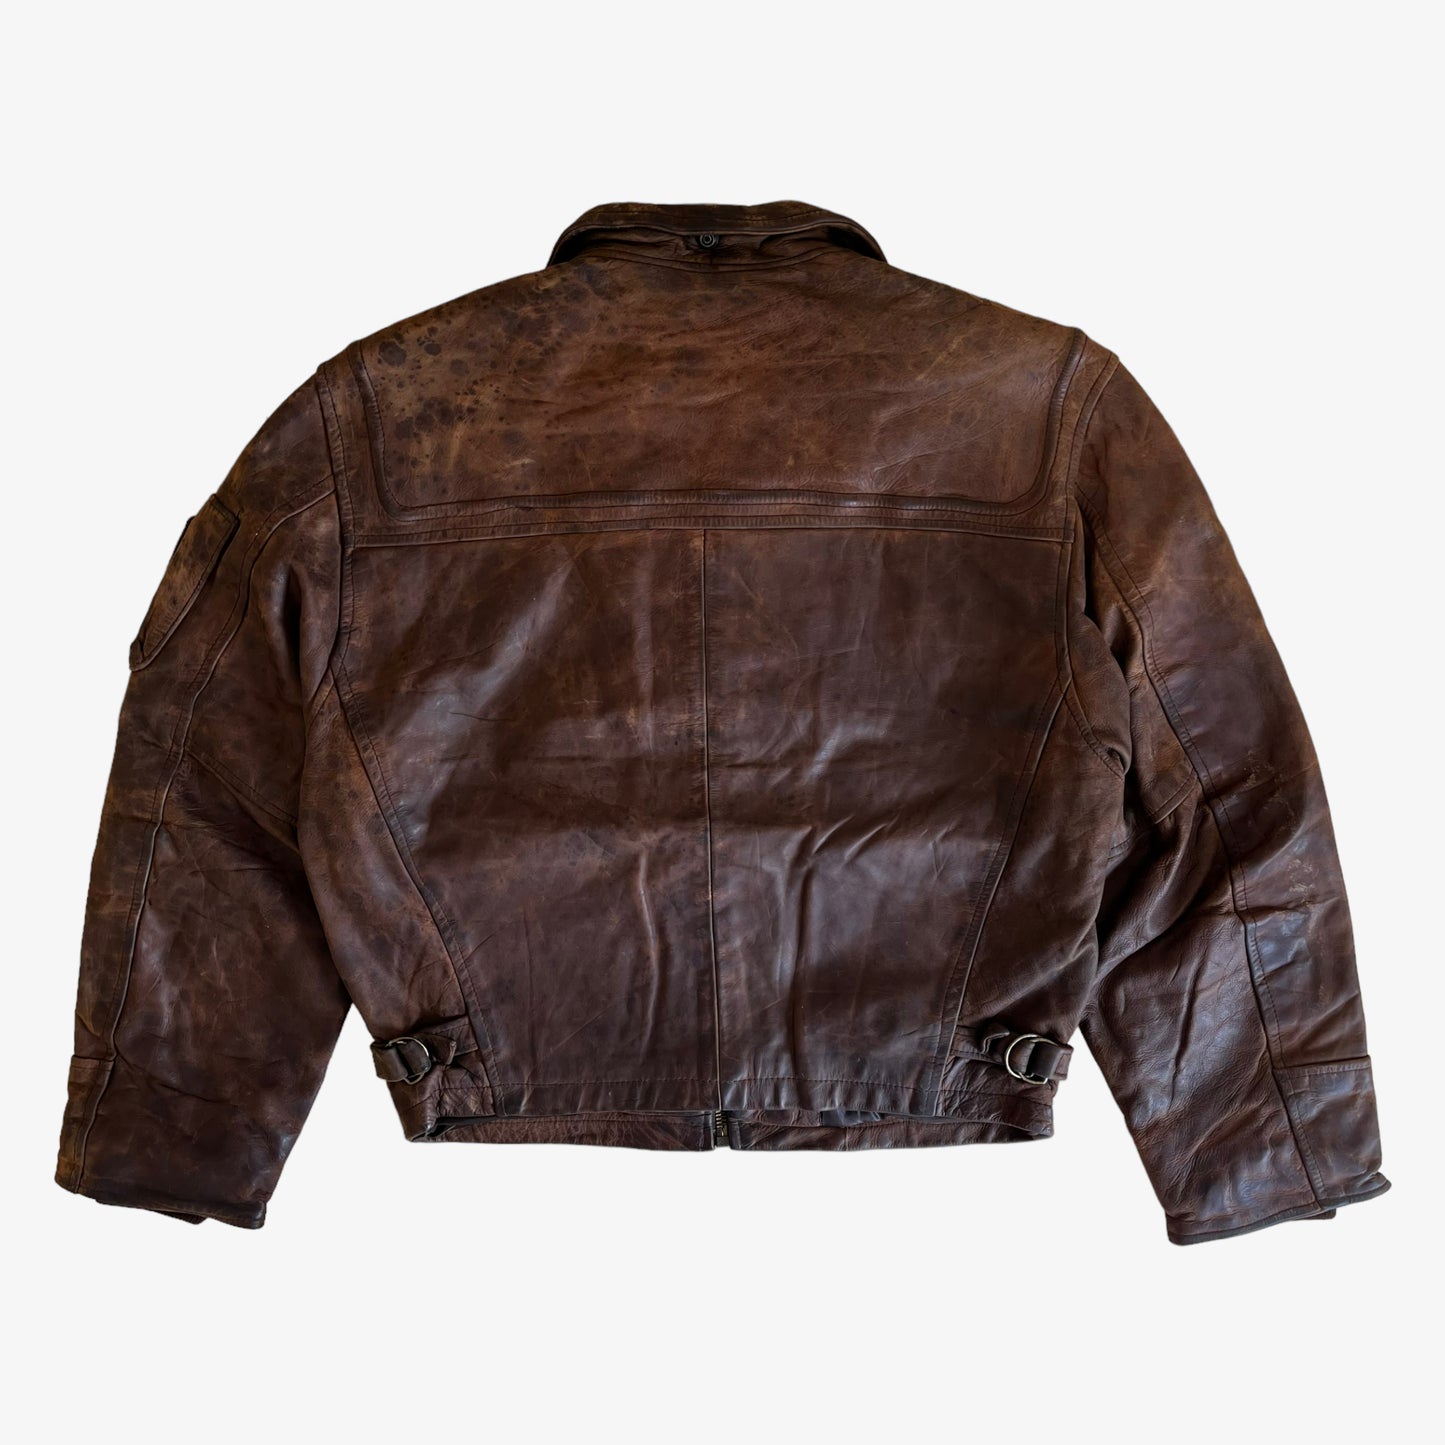 Vintage 90s Redskins Type B32 Brown Leather Pilot Jacket With Hook Fasteners Back - Casspios Dream